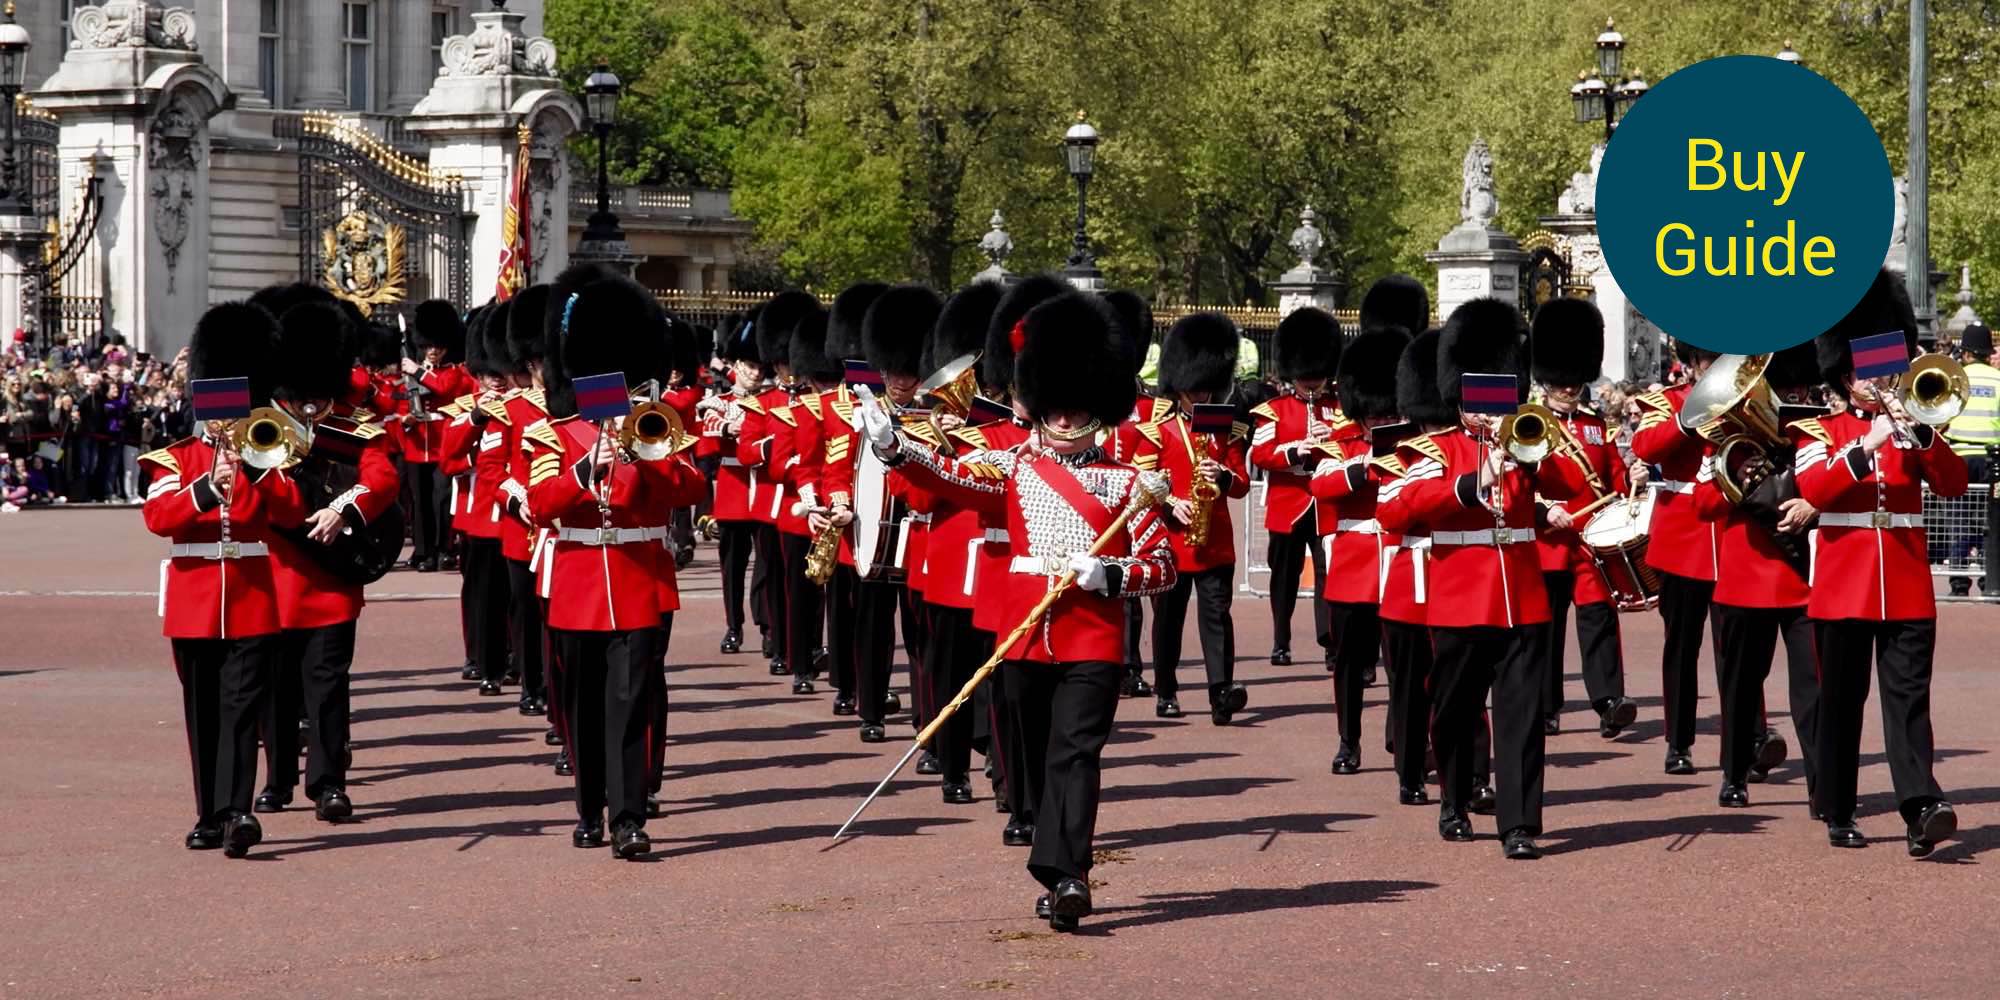 What is the Changing the Guard ceremony in London?